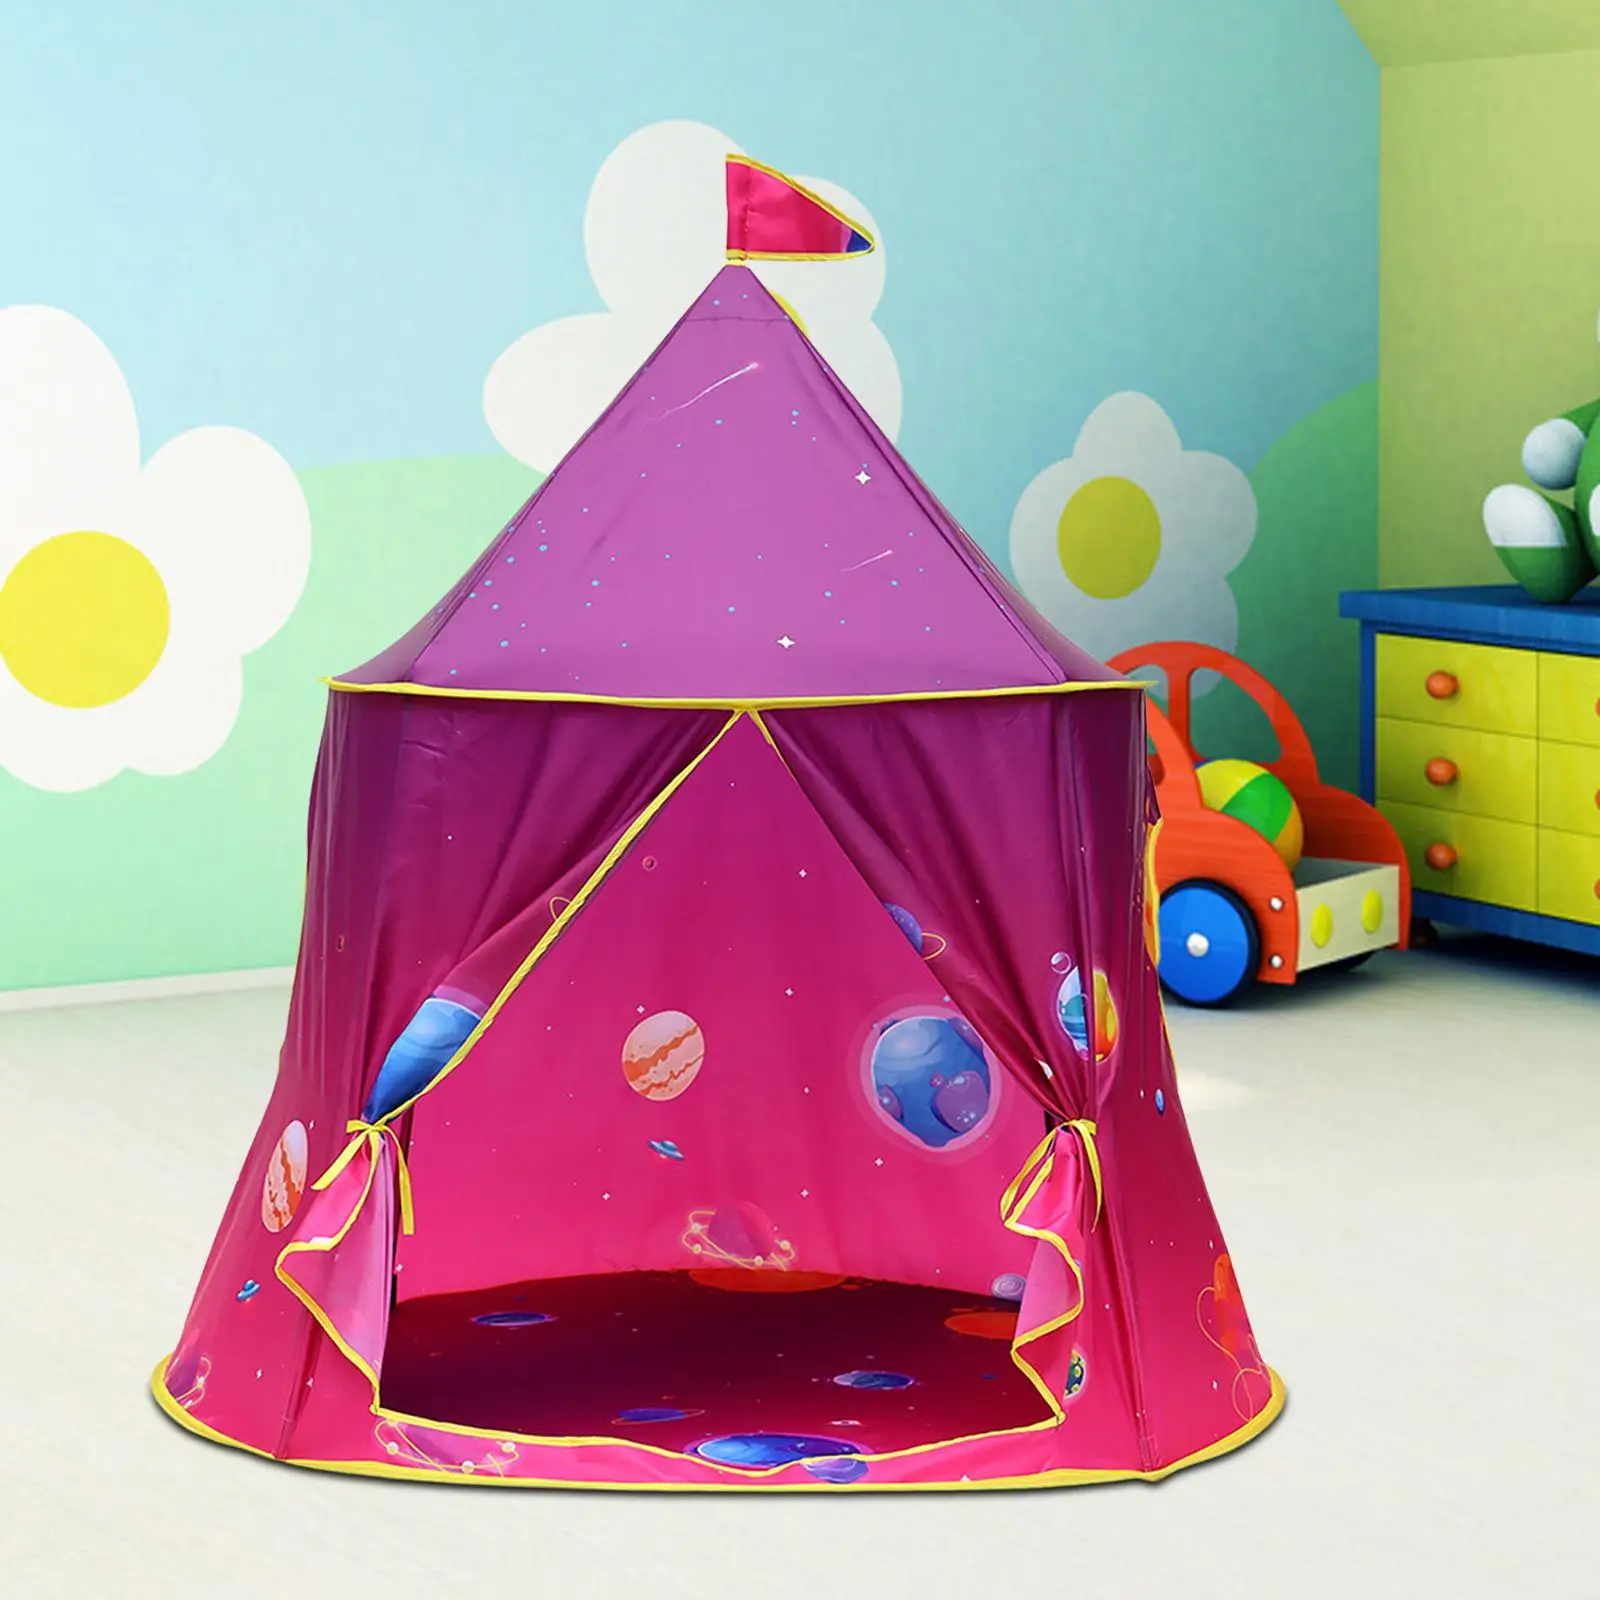 Space Themed Play Tent Castle Easy Assemble Kids Play House Pretend Play Tent Spaceship Tent for Camping Indoor Boy Girl Gifts